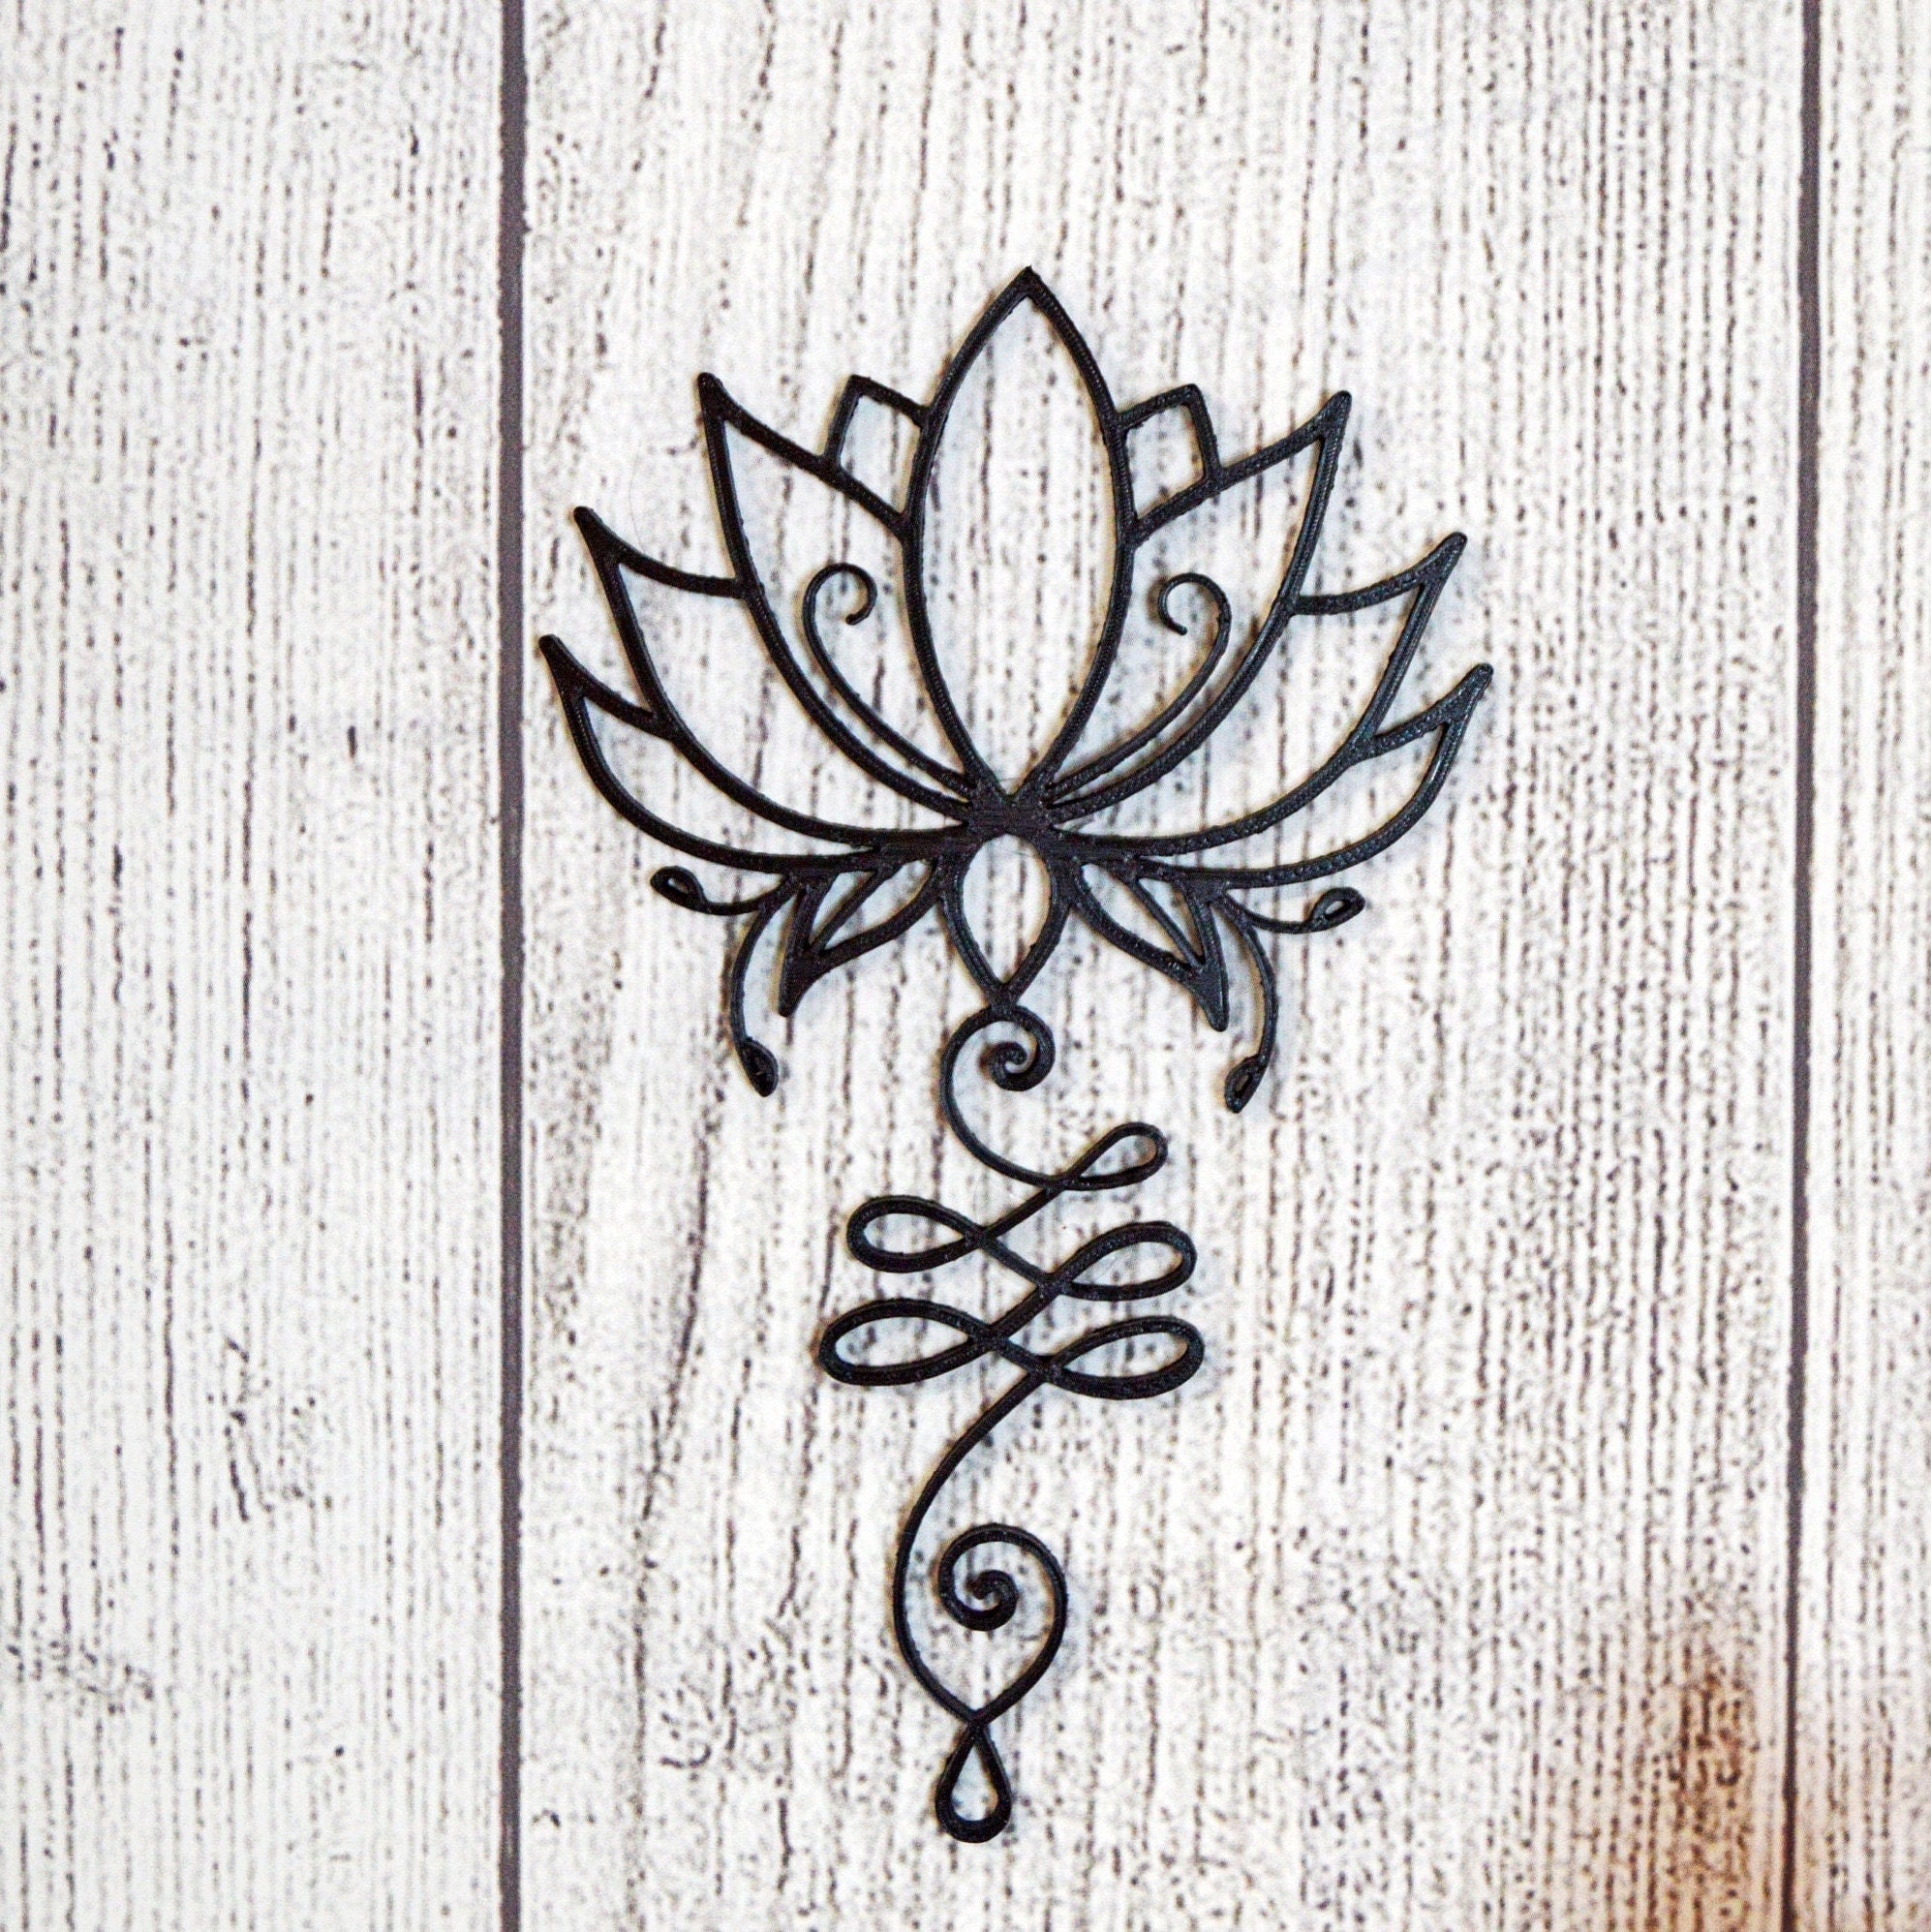 Inkspression Tattooz - Egyptology, Hinduism, and Buddhism, each culture  lends a slightly different take at lotus as spiritual symbolism, but the  lotus in general is reflective of spiritual awakening, purity, potential,  rebirth,